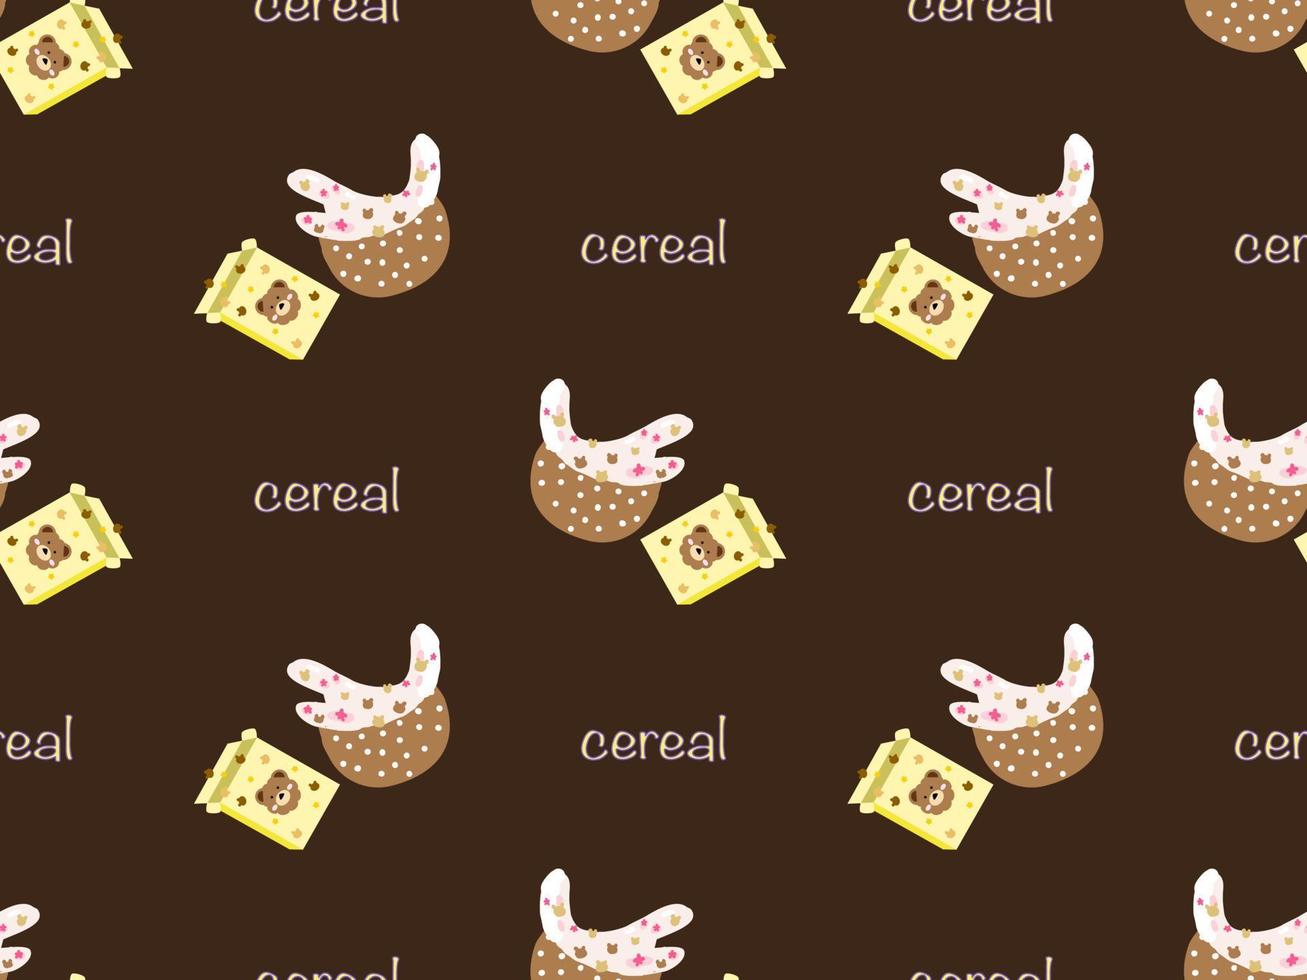 Cereal cartoon character seamless pattern on brown background. Pixel style vector